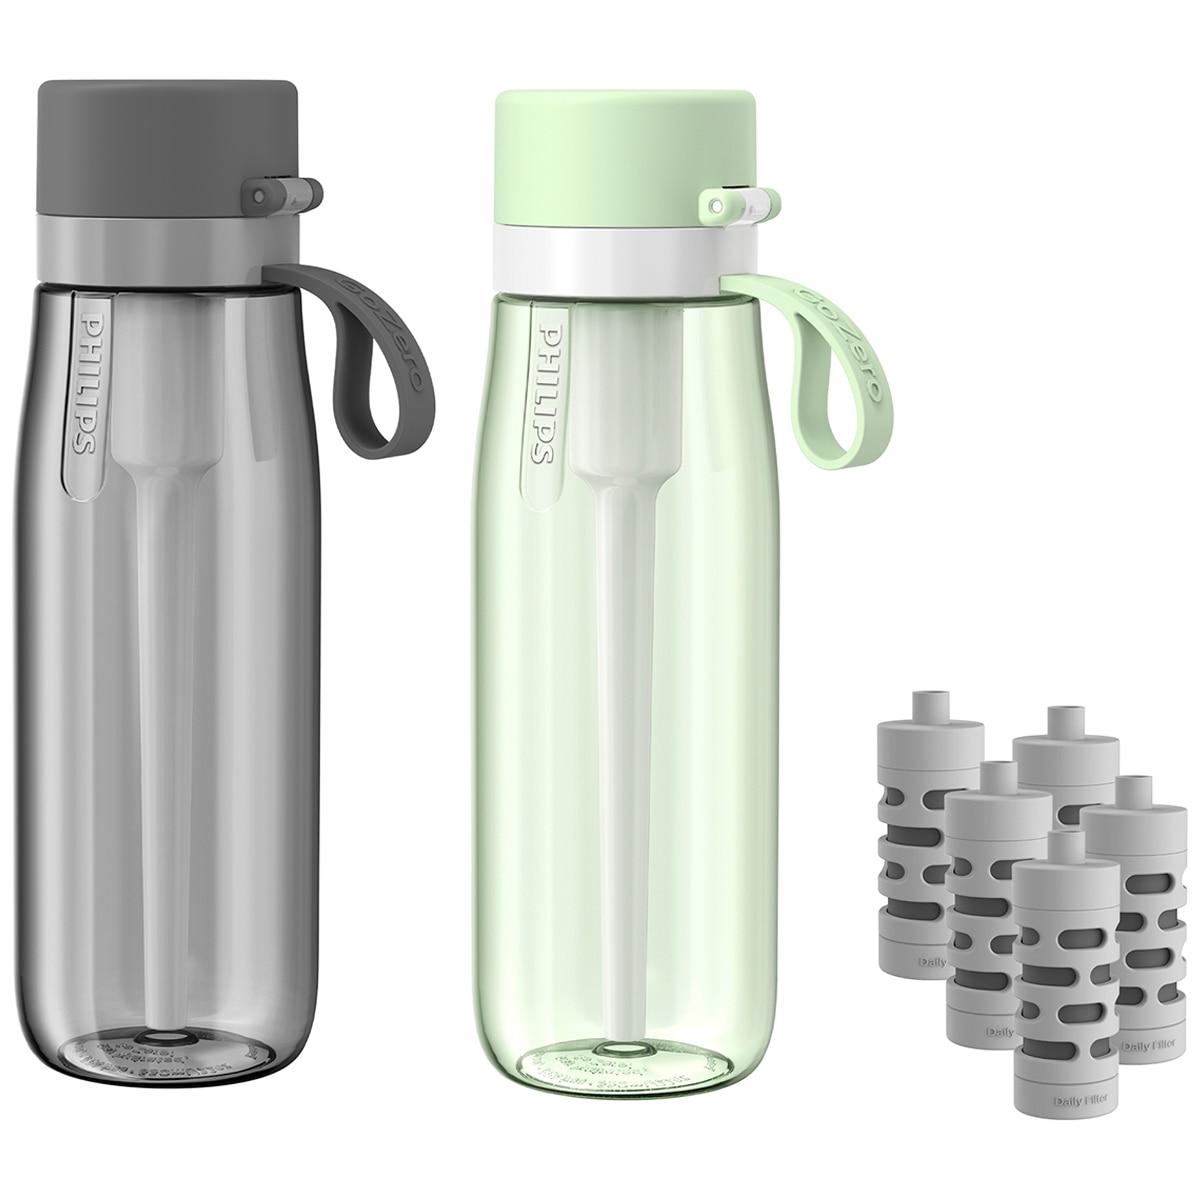 Philips GoZero Daily Straw Filtration Bottles, Value Pack including 5 Daily Filters